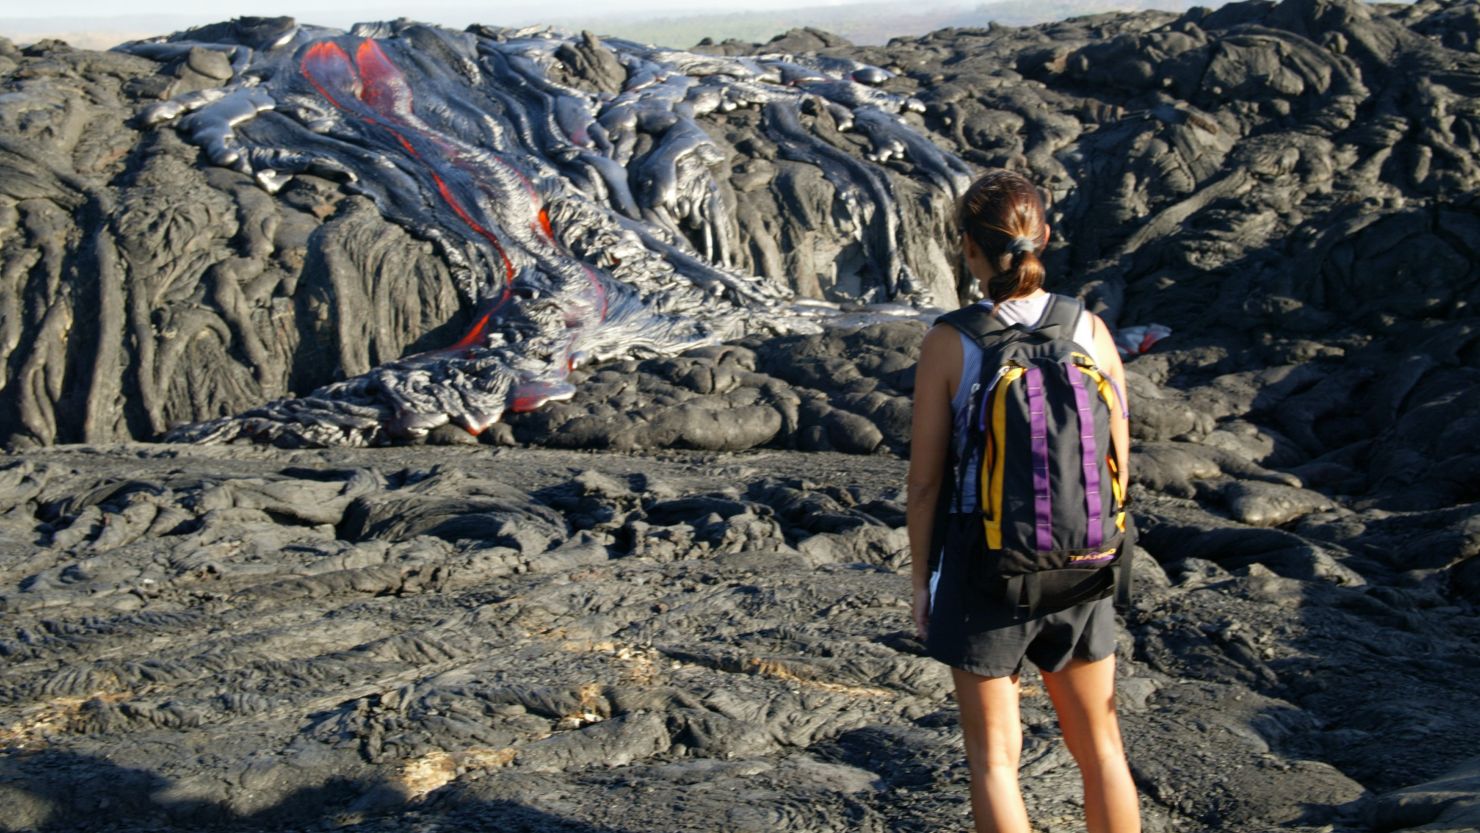 VOLCANO NATIONAL PARK HAWAII: Hiker Gigi Galong, of Kona, watches the lava flow in Volcano National Park.